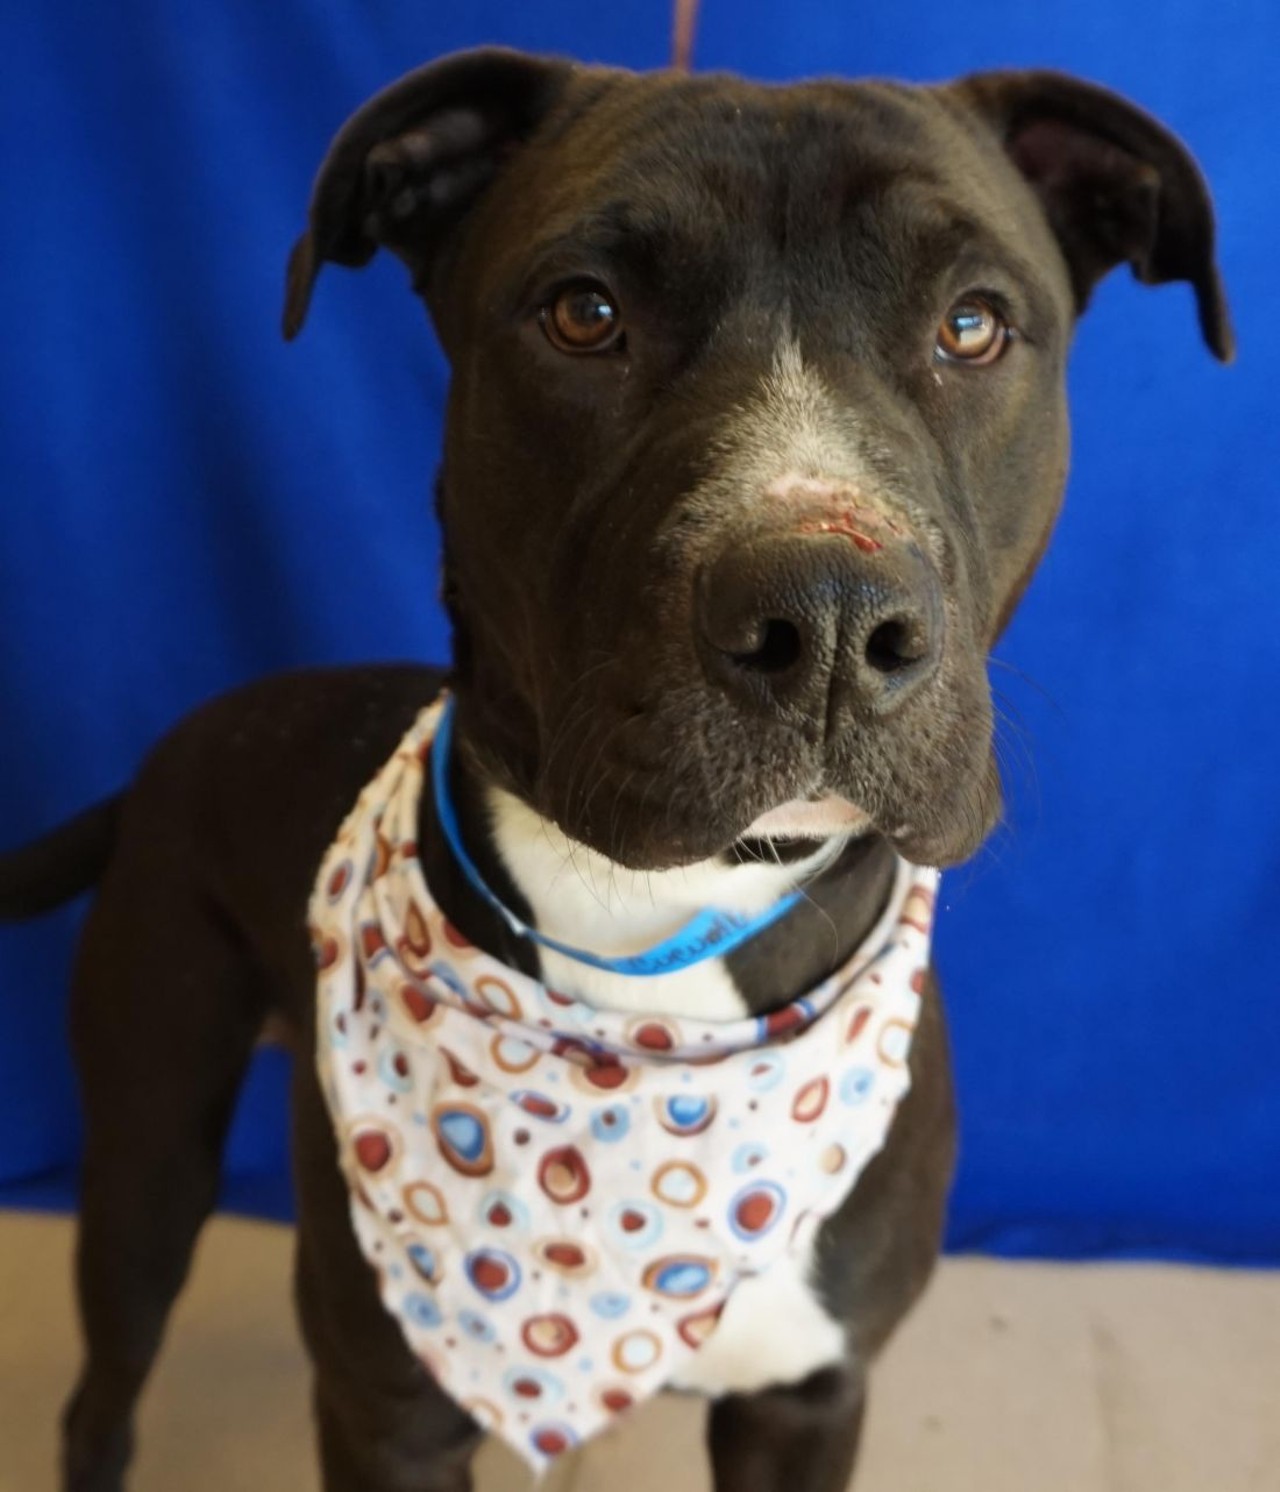 NAME: Cucumber
GENDER: Male
BREED: Labrador Retriever-Pit Bull Terrier mix
AGE: 1 year, 6 months
WEIGHT: 68 pounds
SPECIAL CONSIDERATIONS: None
REASON I CAME TO MHS: Agency transfer
LOCATION: Rochester Hills Center for Animal Care
ID NUMBER: 865108